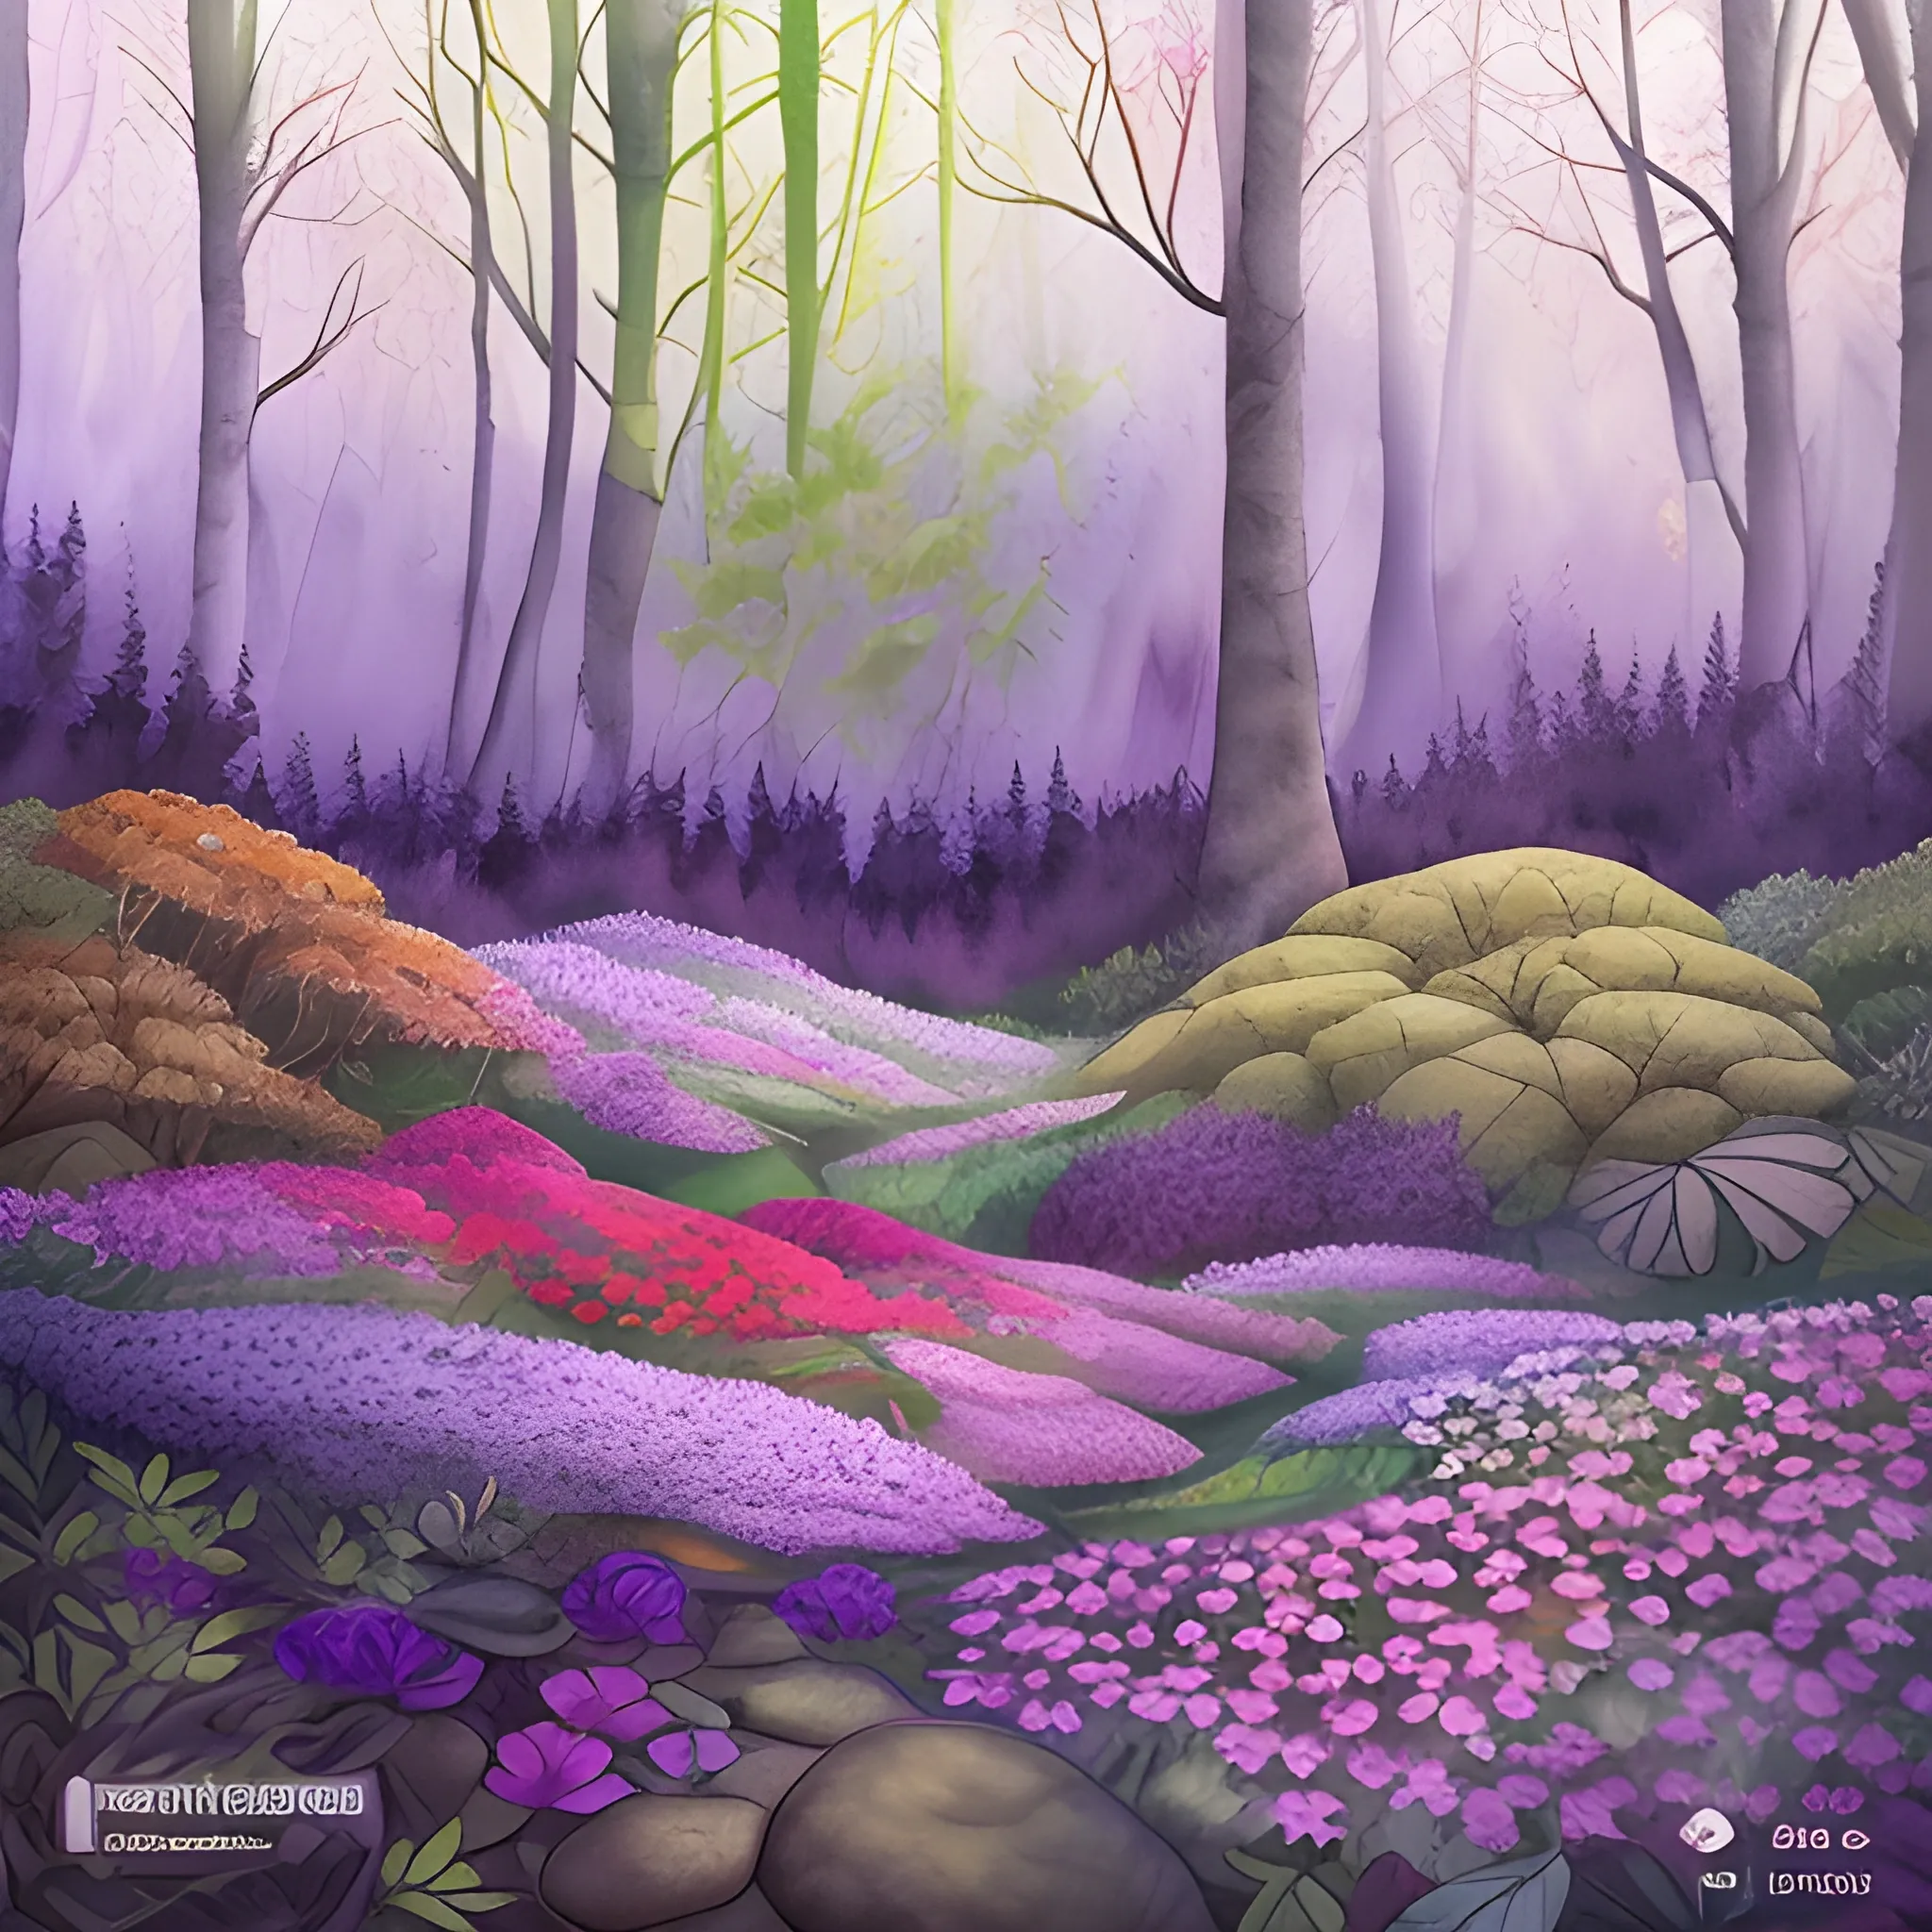 Create a watercolor painting depicting a 45-degree angle view from the forest floor, with an abundant carpet of leaves and numerous flowers. Use a color palette of purples to bring this vegetation blanket to life. Ensure you capture the intricate beauty of the leaves and flowers in the foreground. Your artwork should convey the feeling of being immersed in the lush wilderness of the forest.